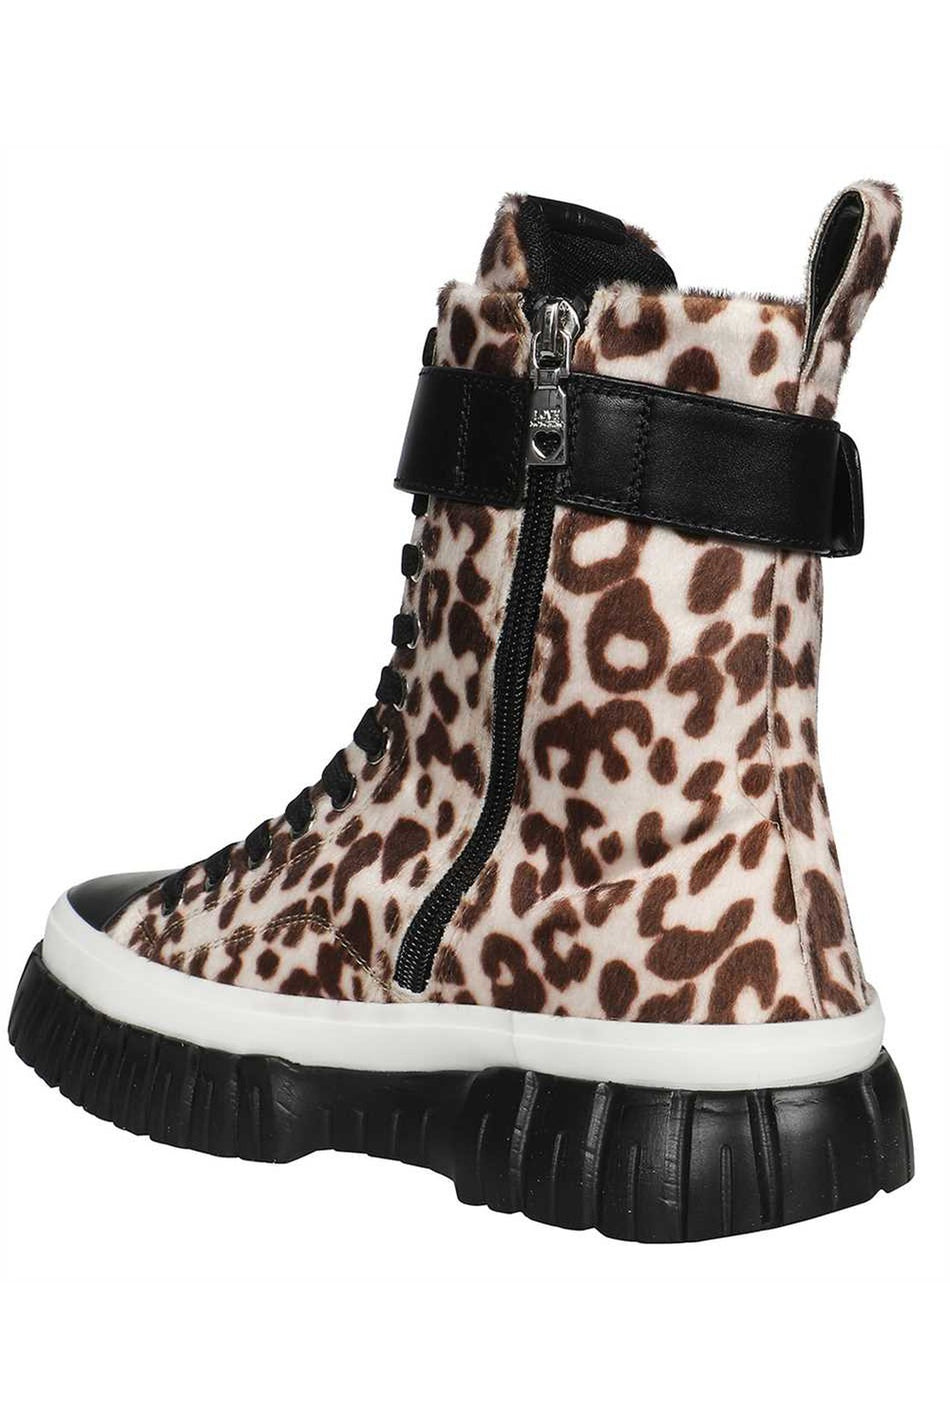 Canvas high-top sneakers-Love Moschino-OUTLET-SALE-ARCHIVIST